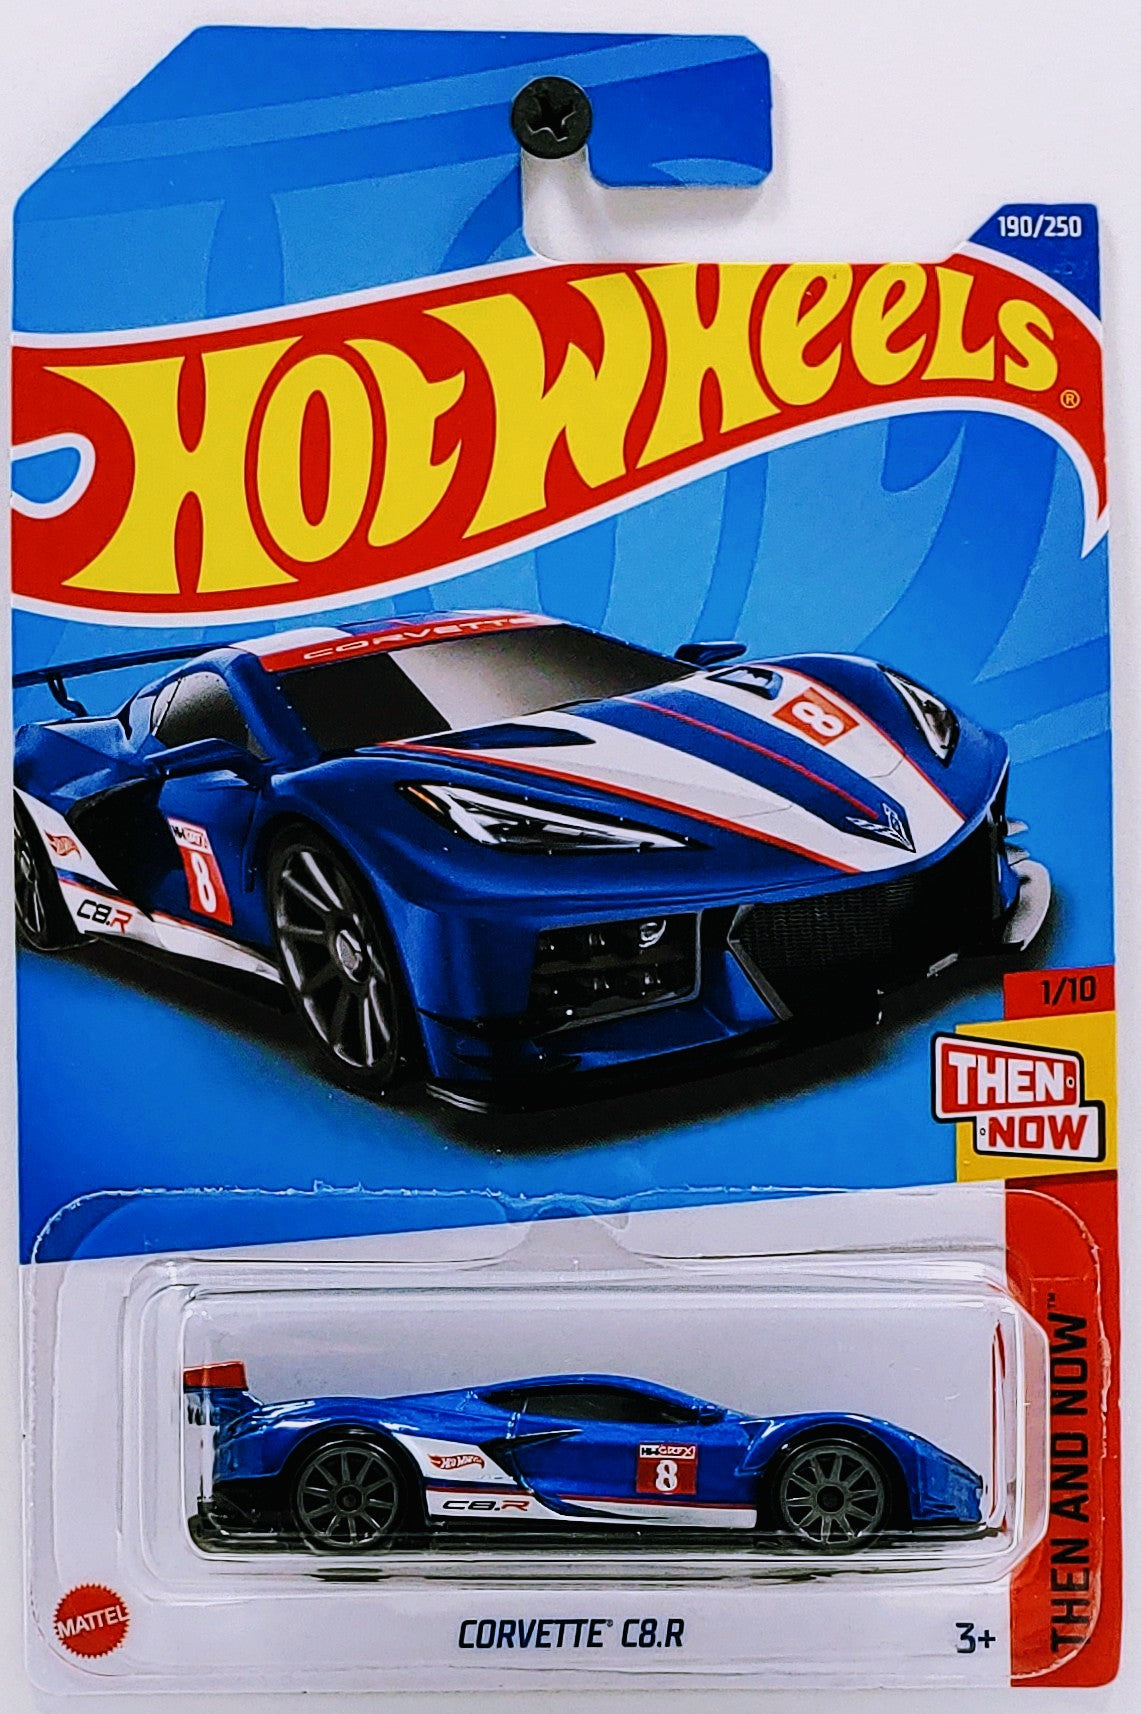 Hot Wheels 2022 - Collector # 190/250 - Then And Now 1/10 - Corvette C8.R - Blue - 10 Spokes - IC